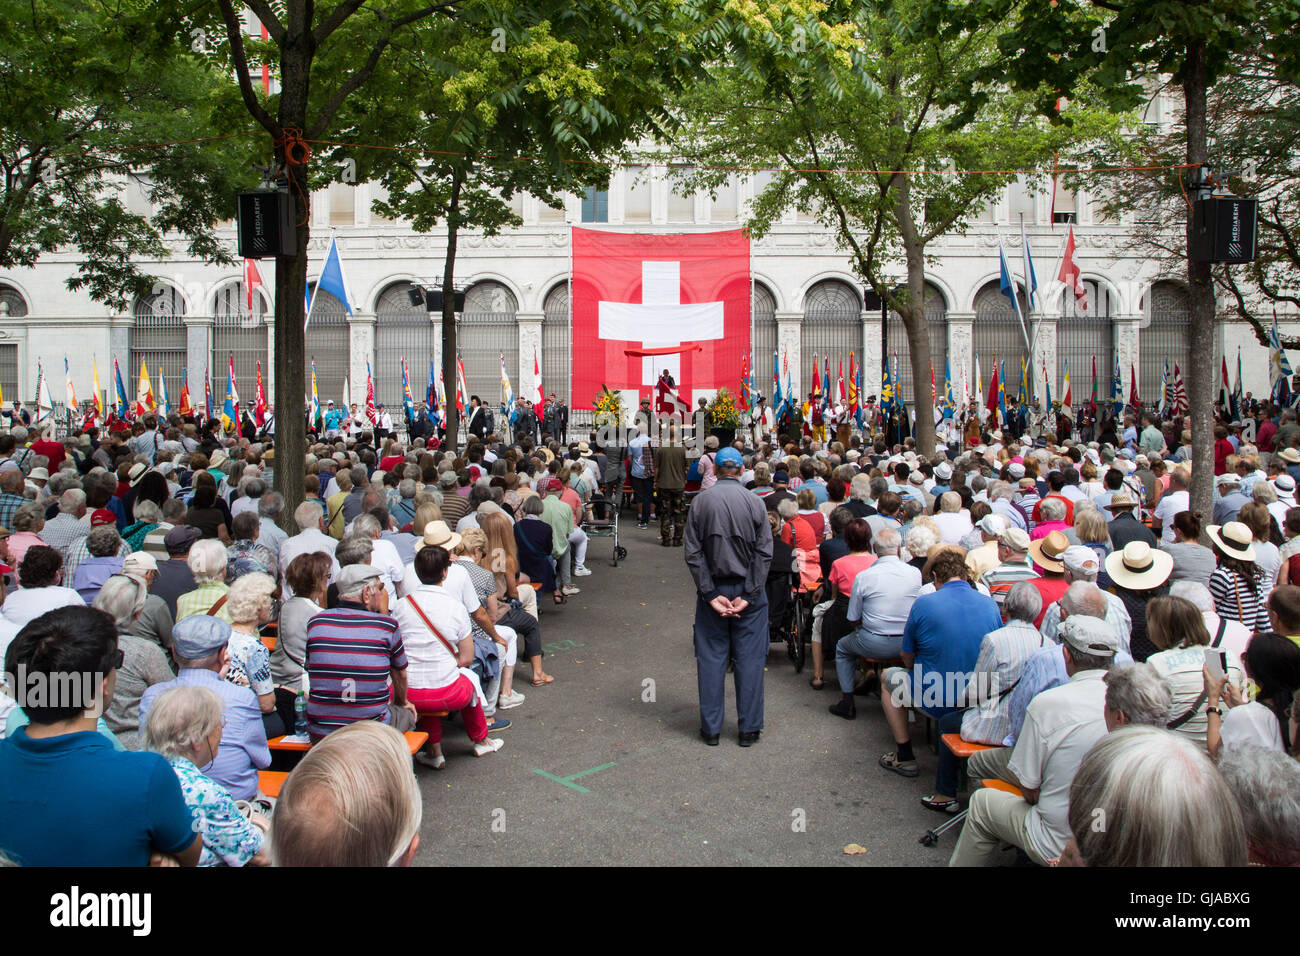 Crowds watch on at a ceremony in Zurich in celebration of Swiss National Day. Stock Photo